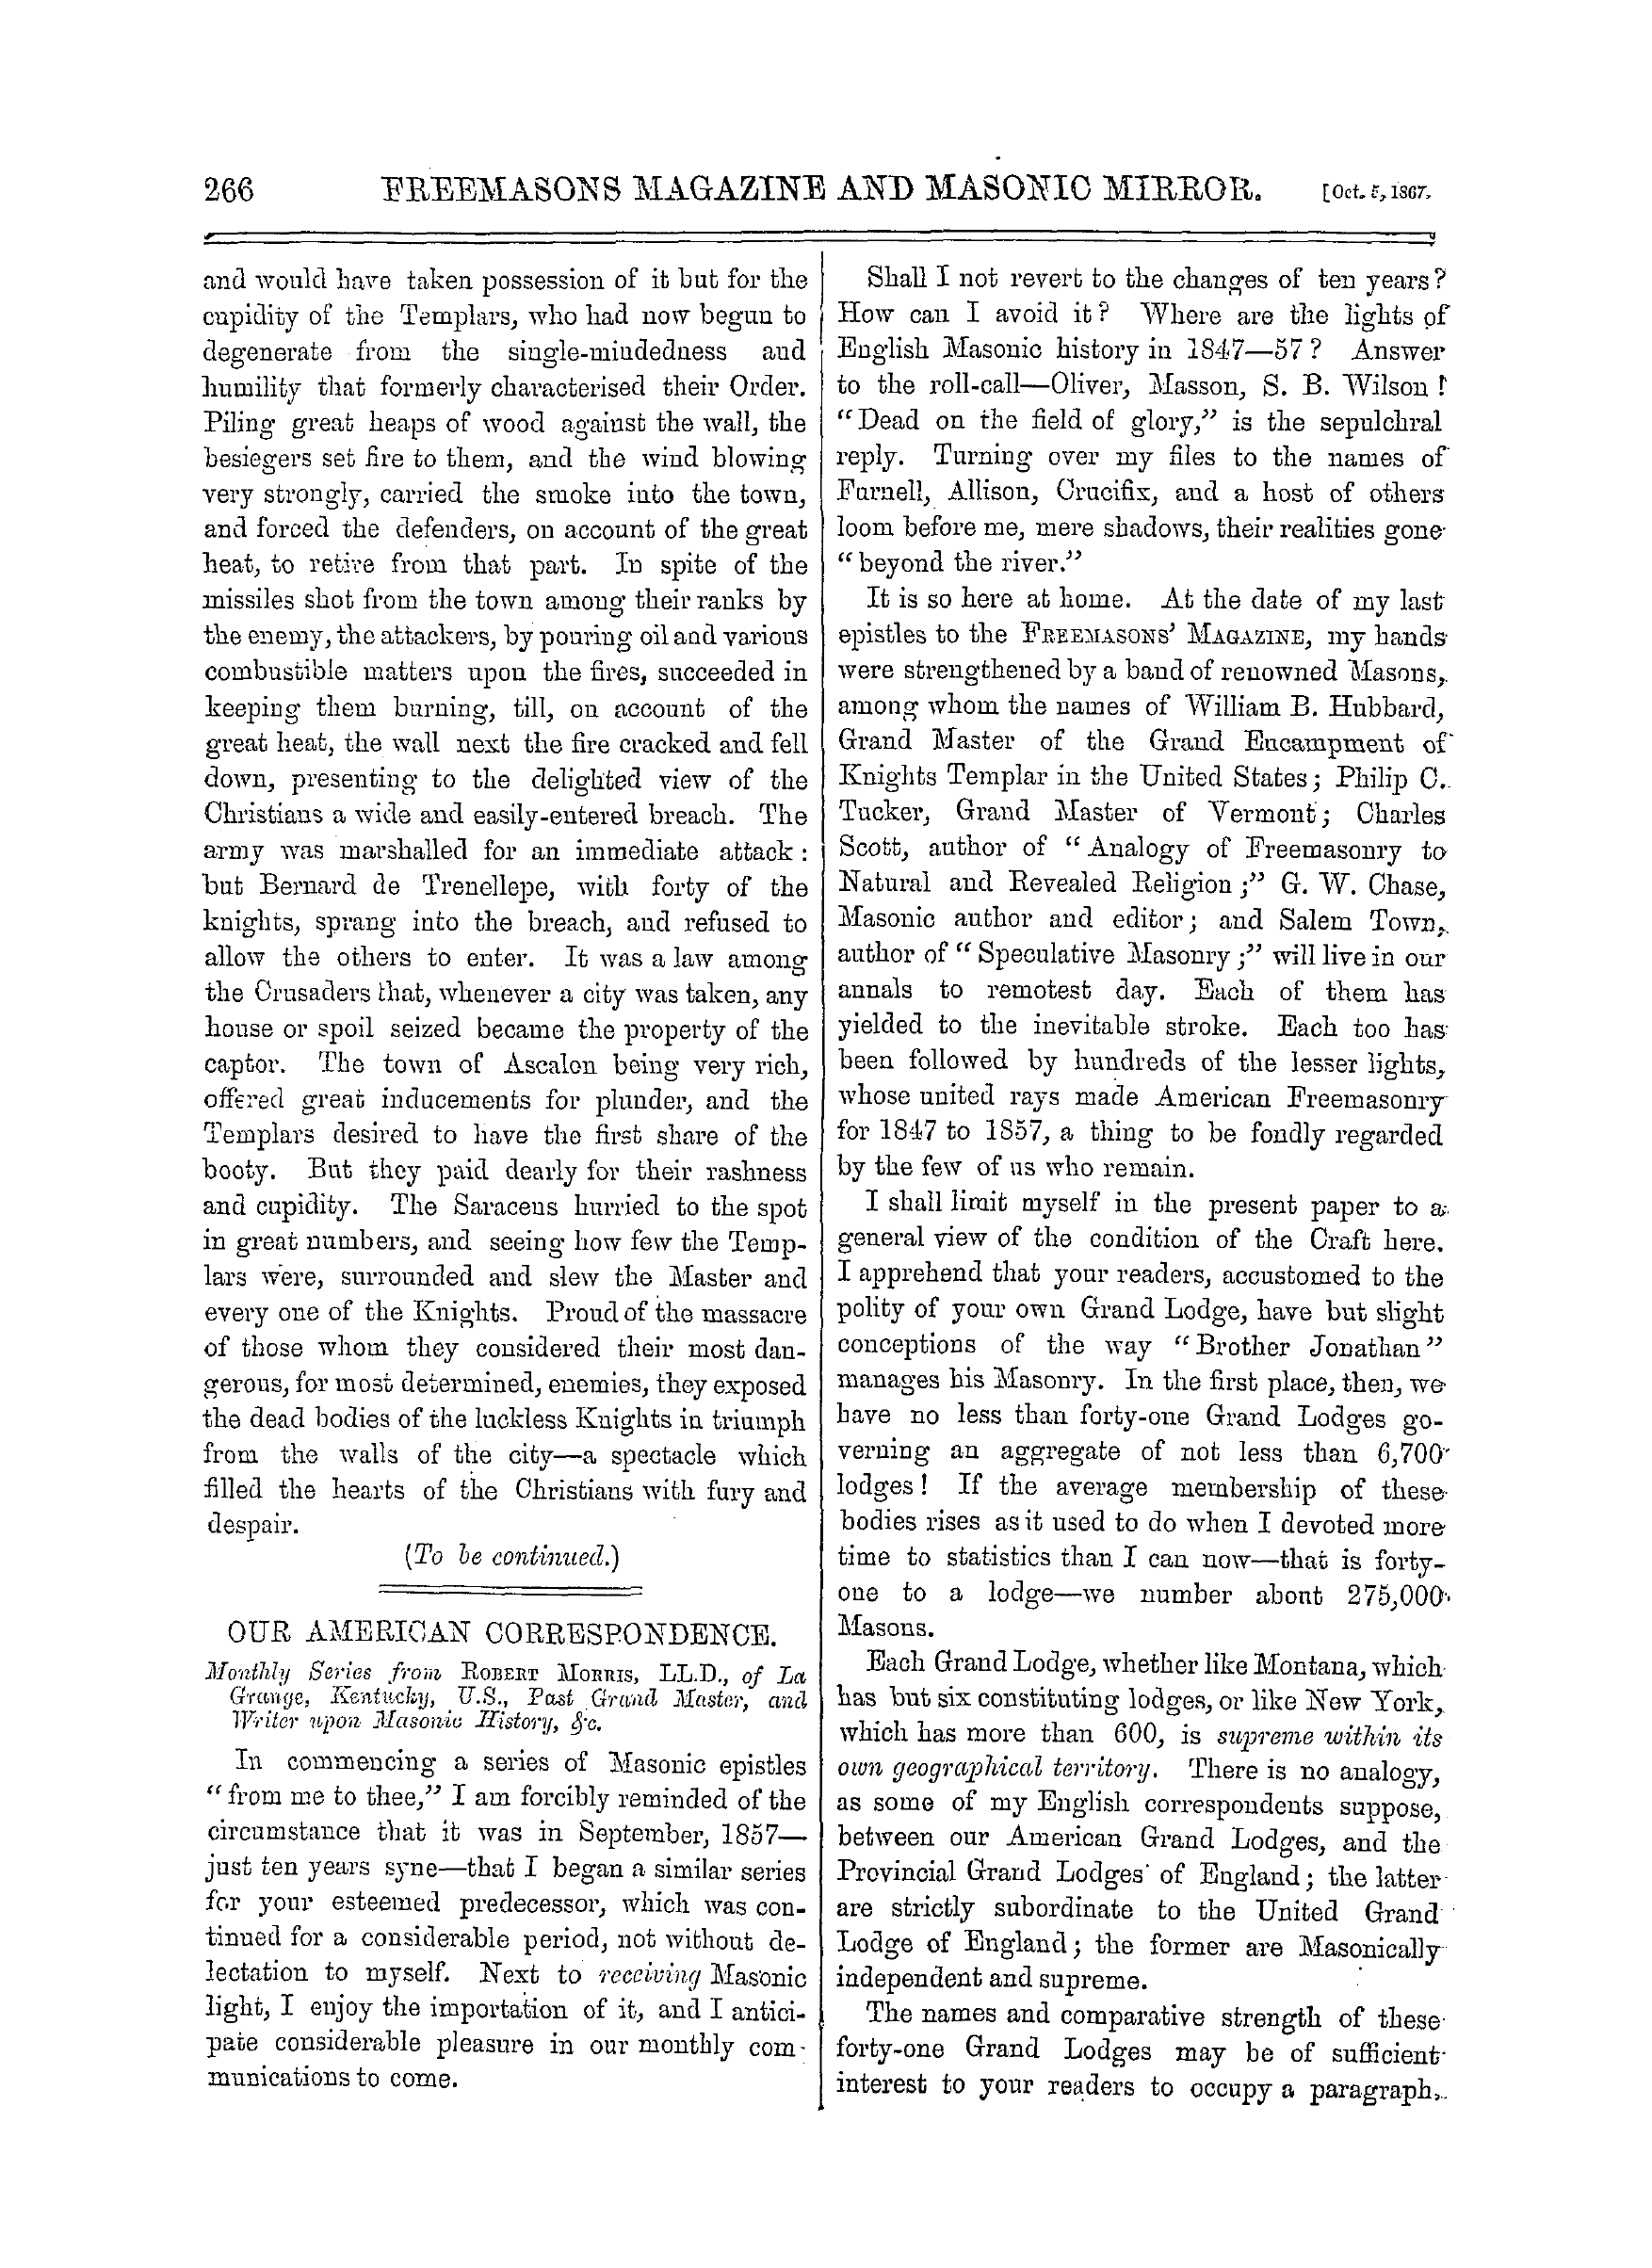 The Freemasons' Monthly Magazine: 1867-10-05 - Our American Correspondence.